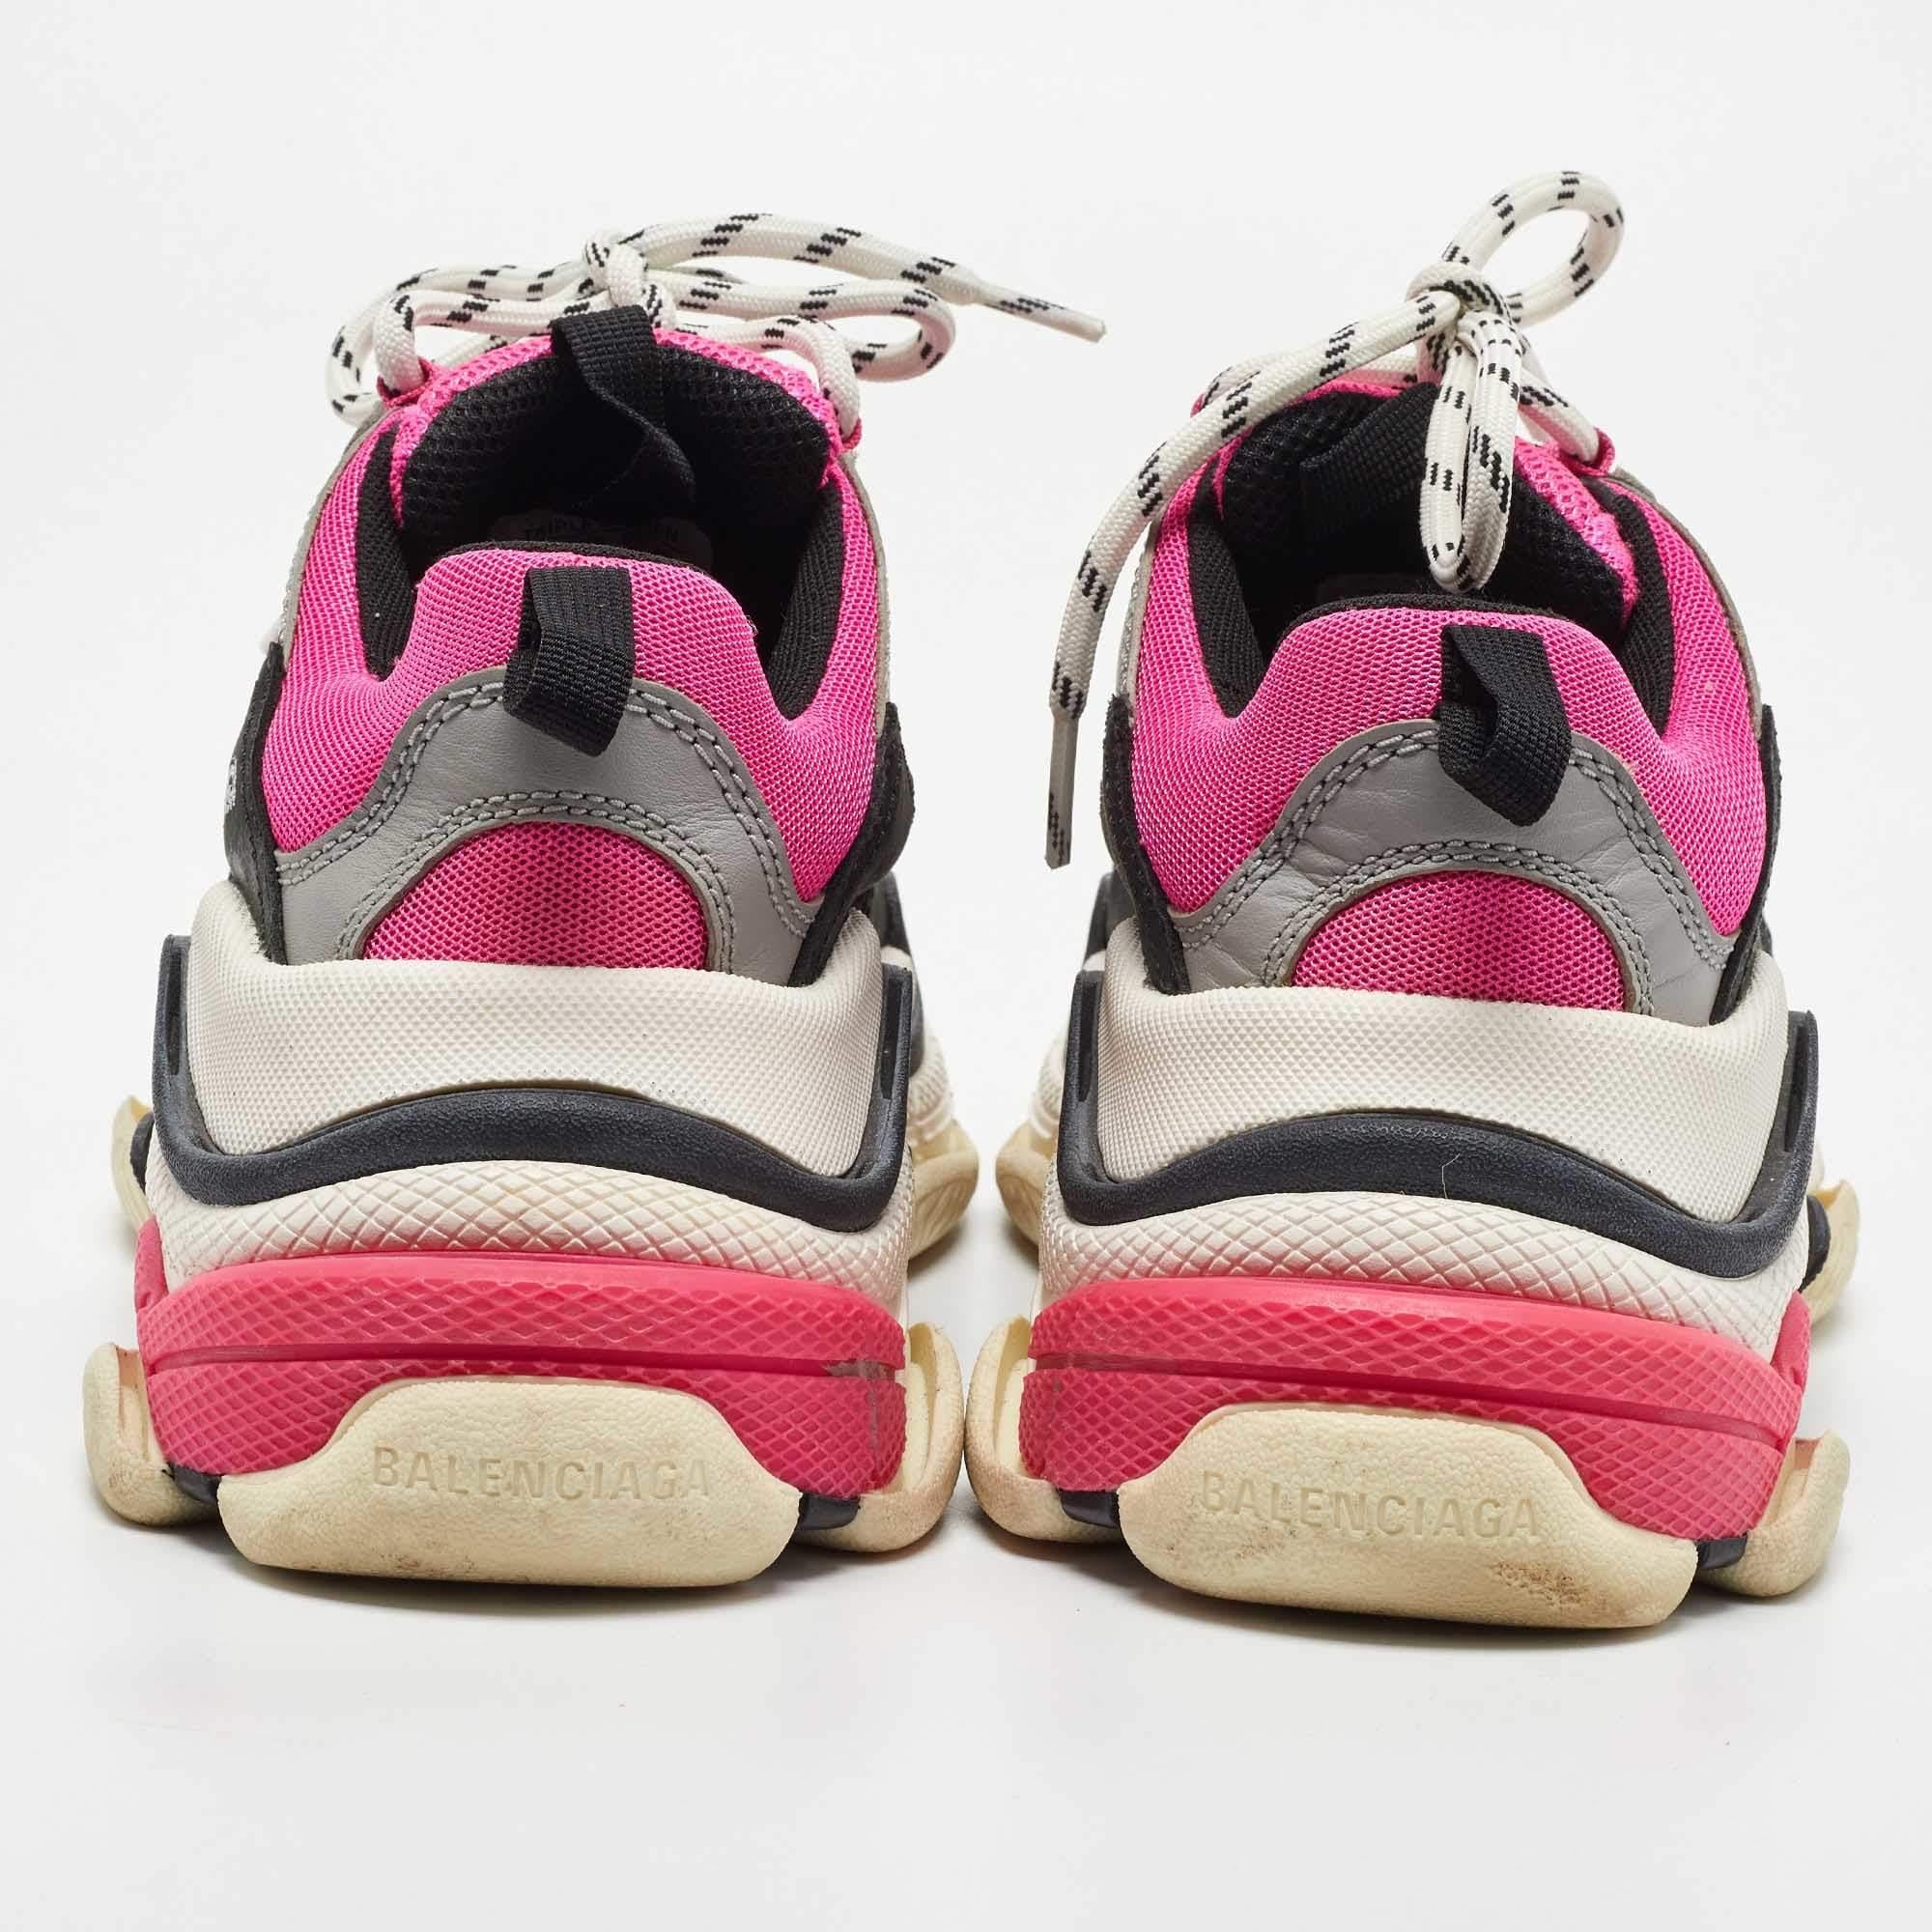 Balenciaga Pink/Black Mesh and Leather Triple S Sneakers Size 37 1